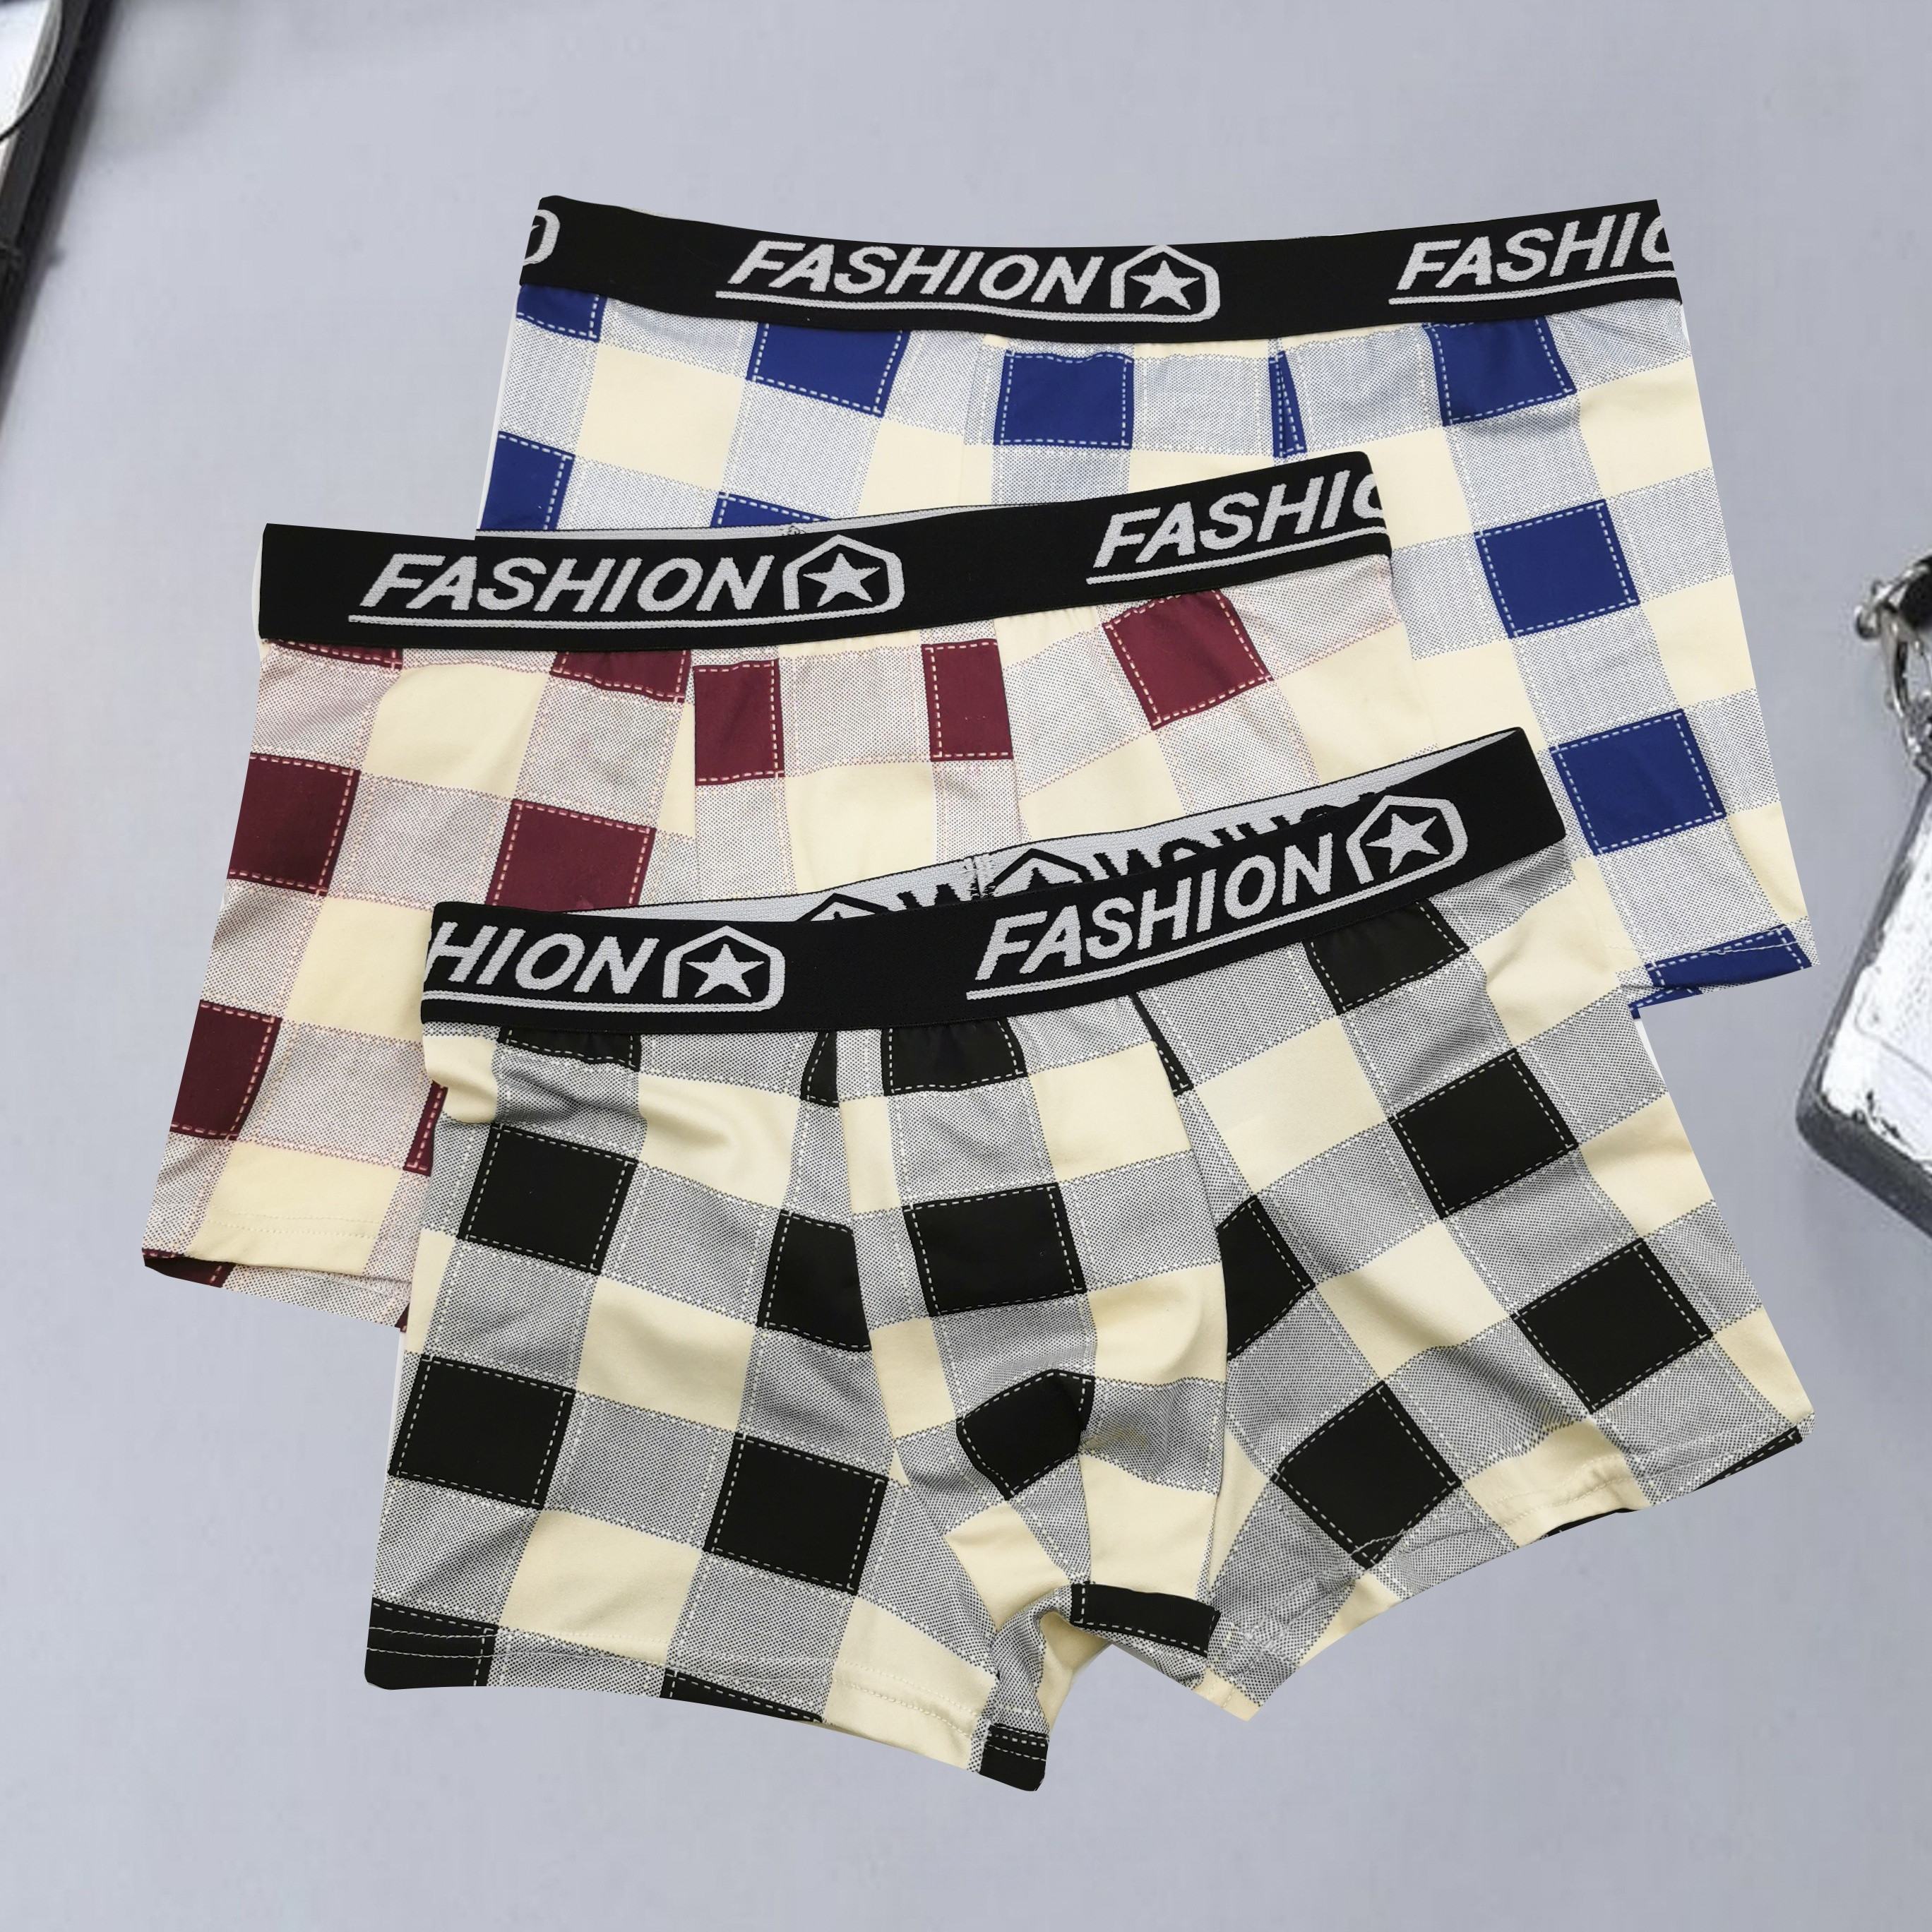 

3pcs Men's Classic Plaid Boxer Briefs, Breathable Comfy Boxer Trunks, Students Elastic Sports Shorts, Teenagers Casual & Durable Underwear Ideal For Everyday Comfort